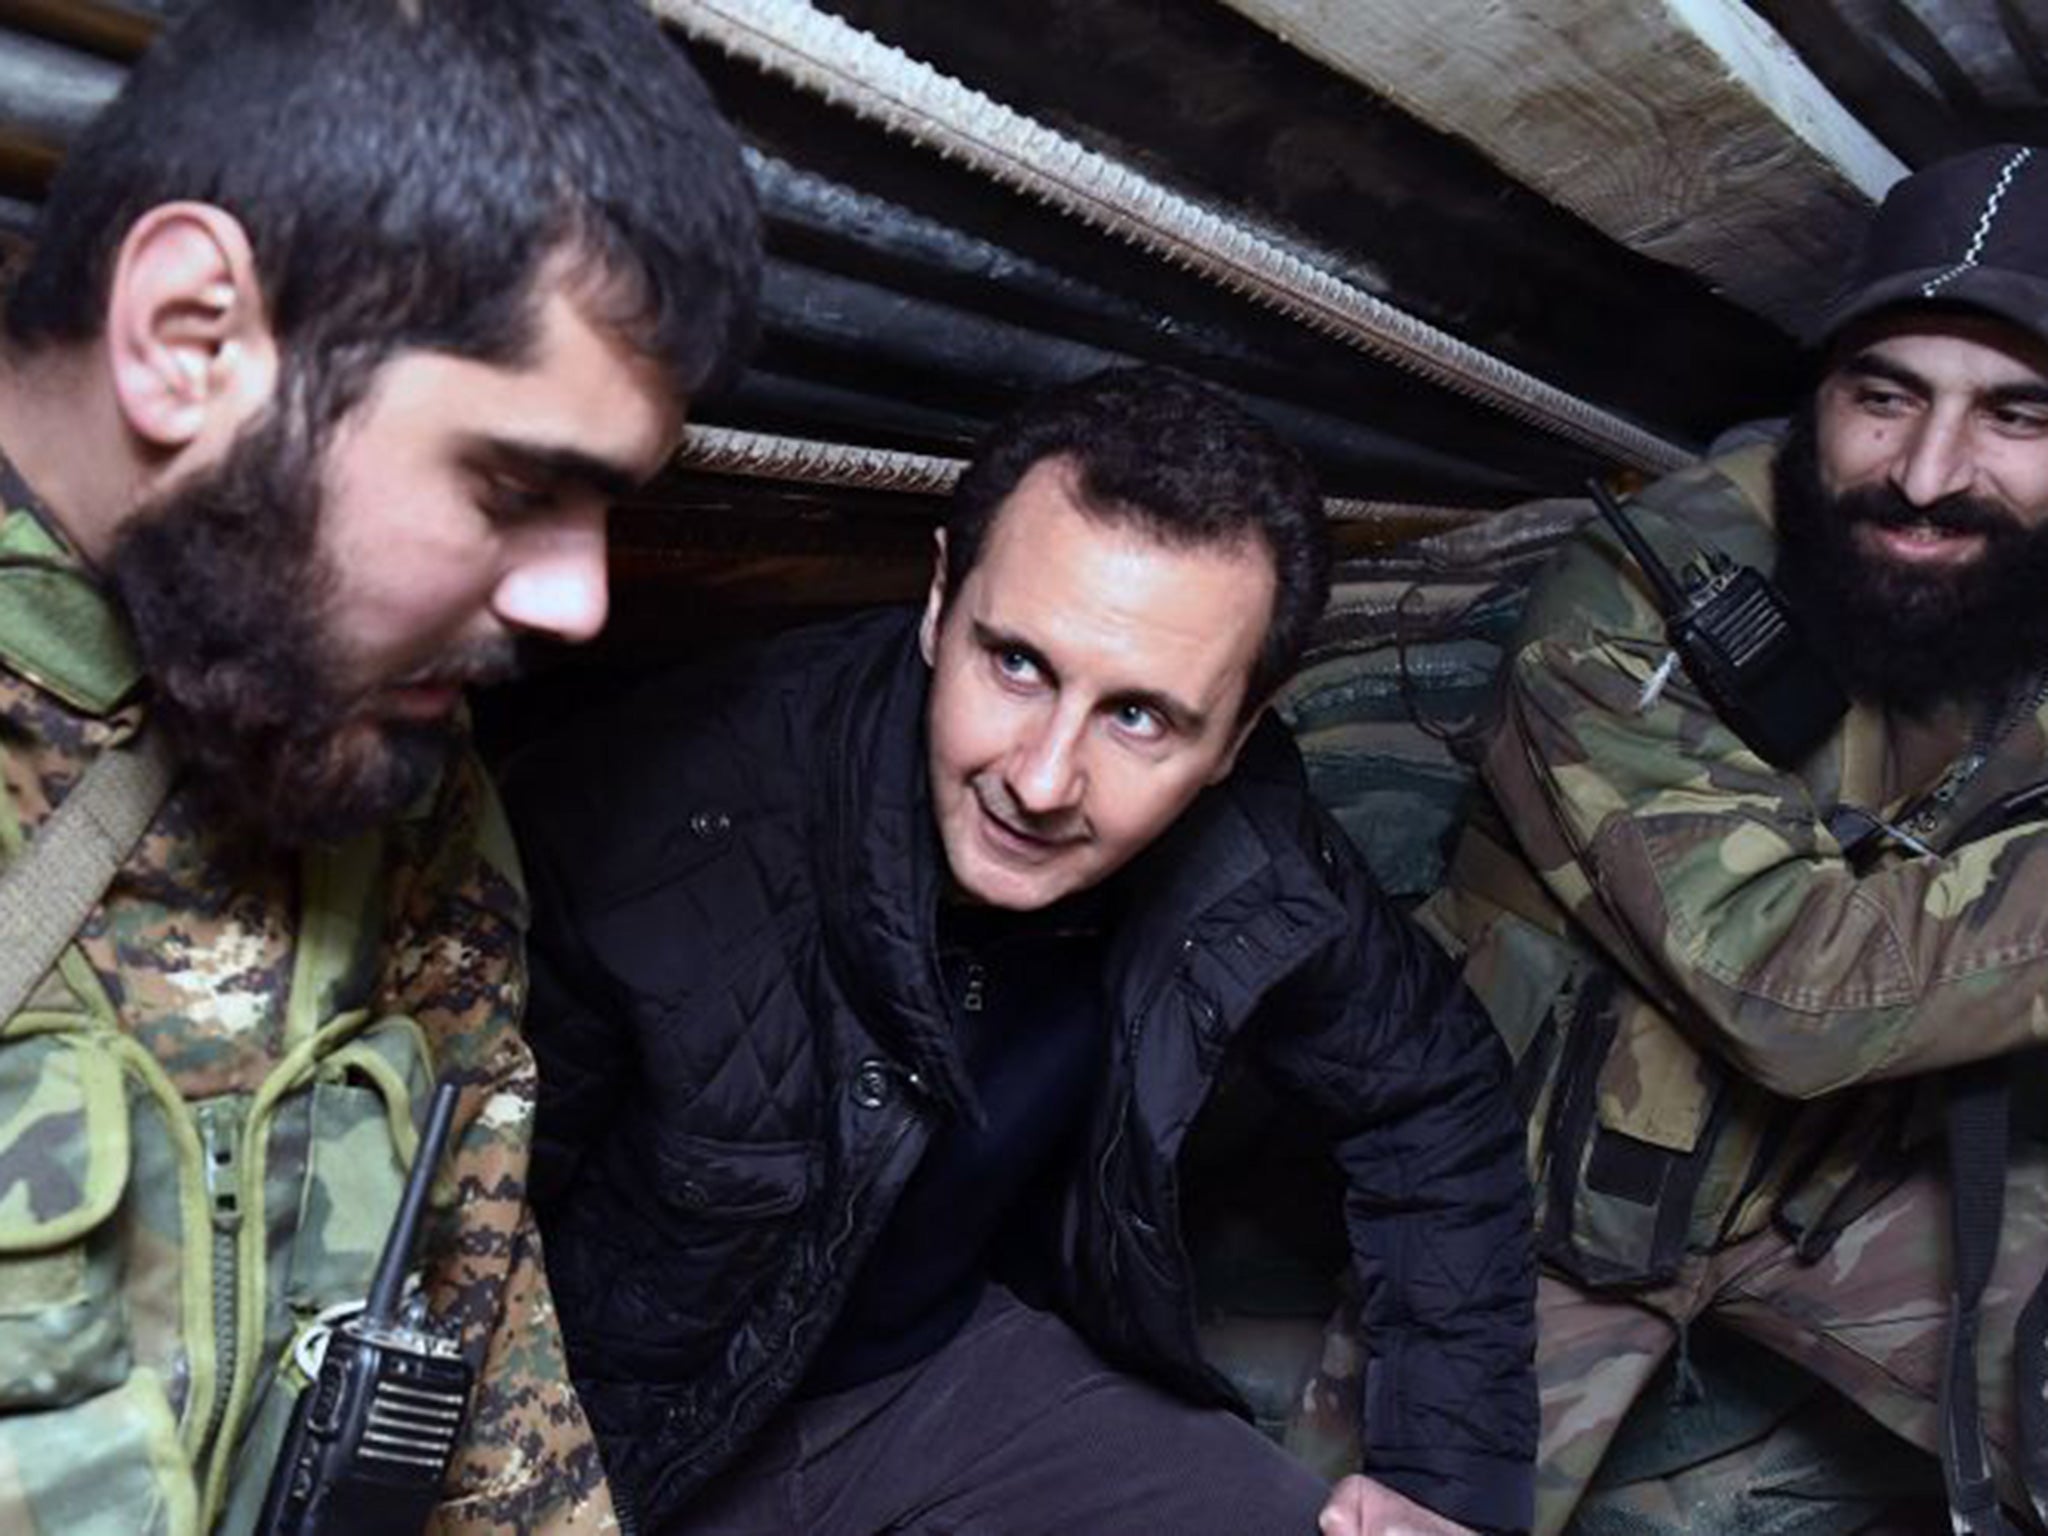 Bashar al-Assad, center, speaks with Syrian troops during his visit to the front line in the eastern Damascus district of Jobar, Syria